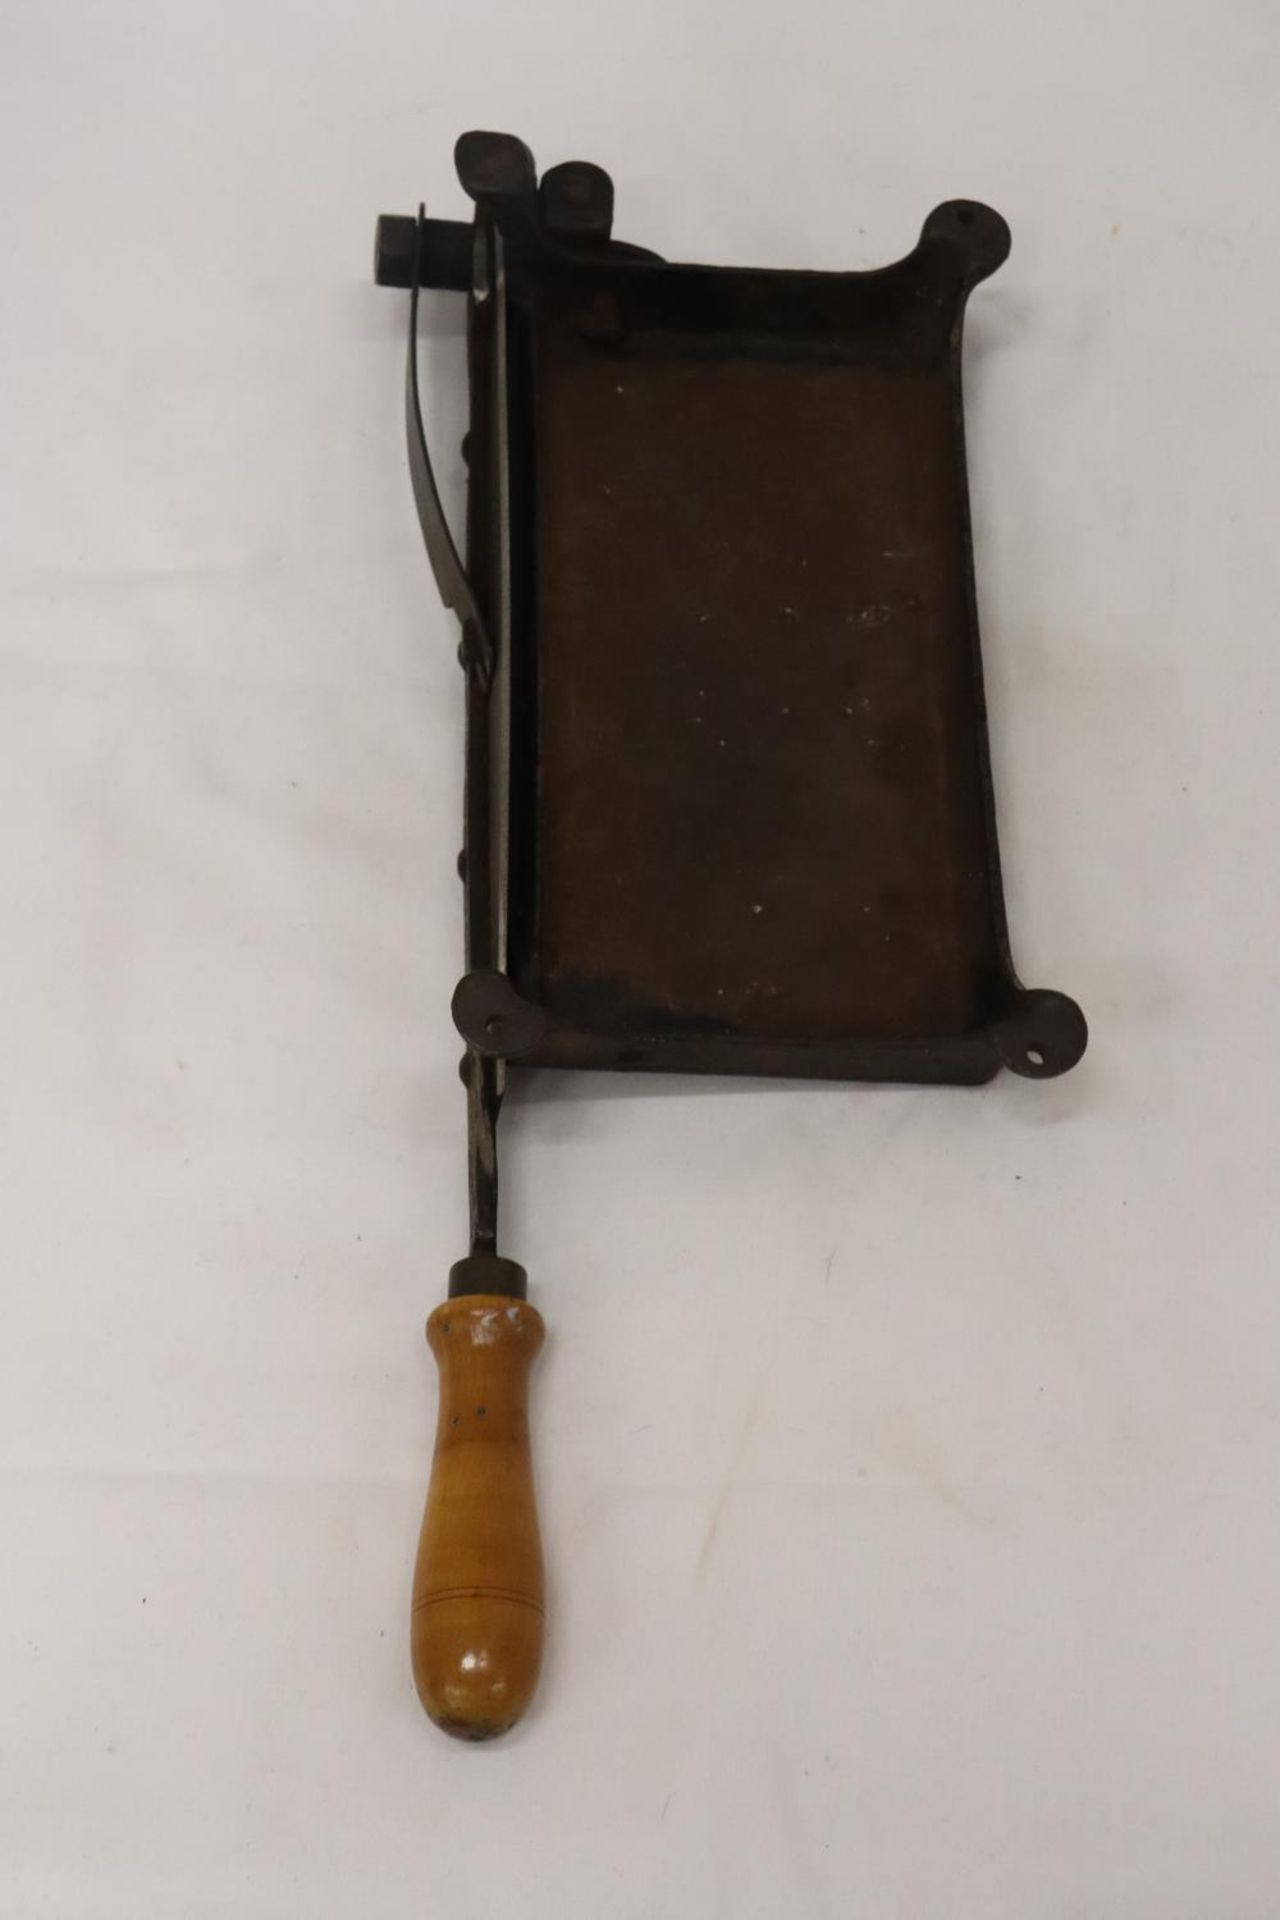 A VERY SHARP VINTAGE CAST GUILLOTINE - Image 7 of 7